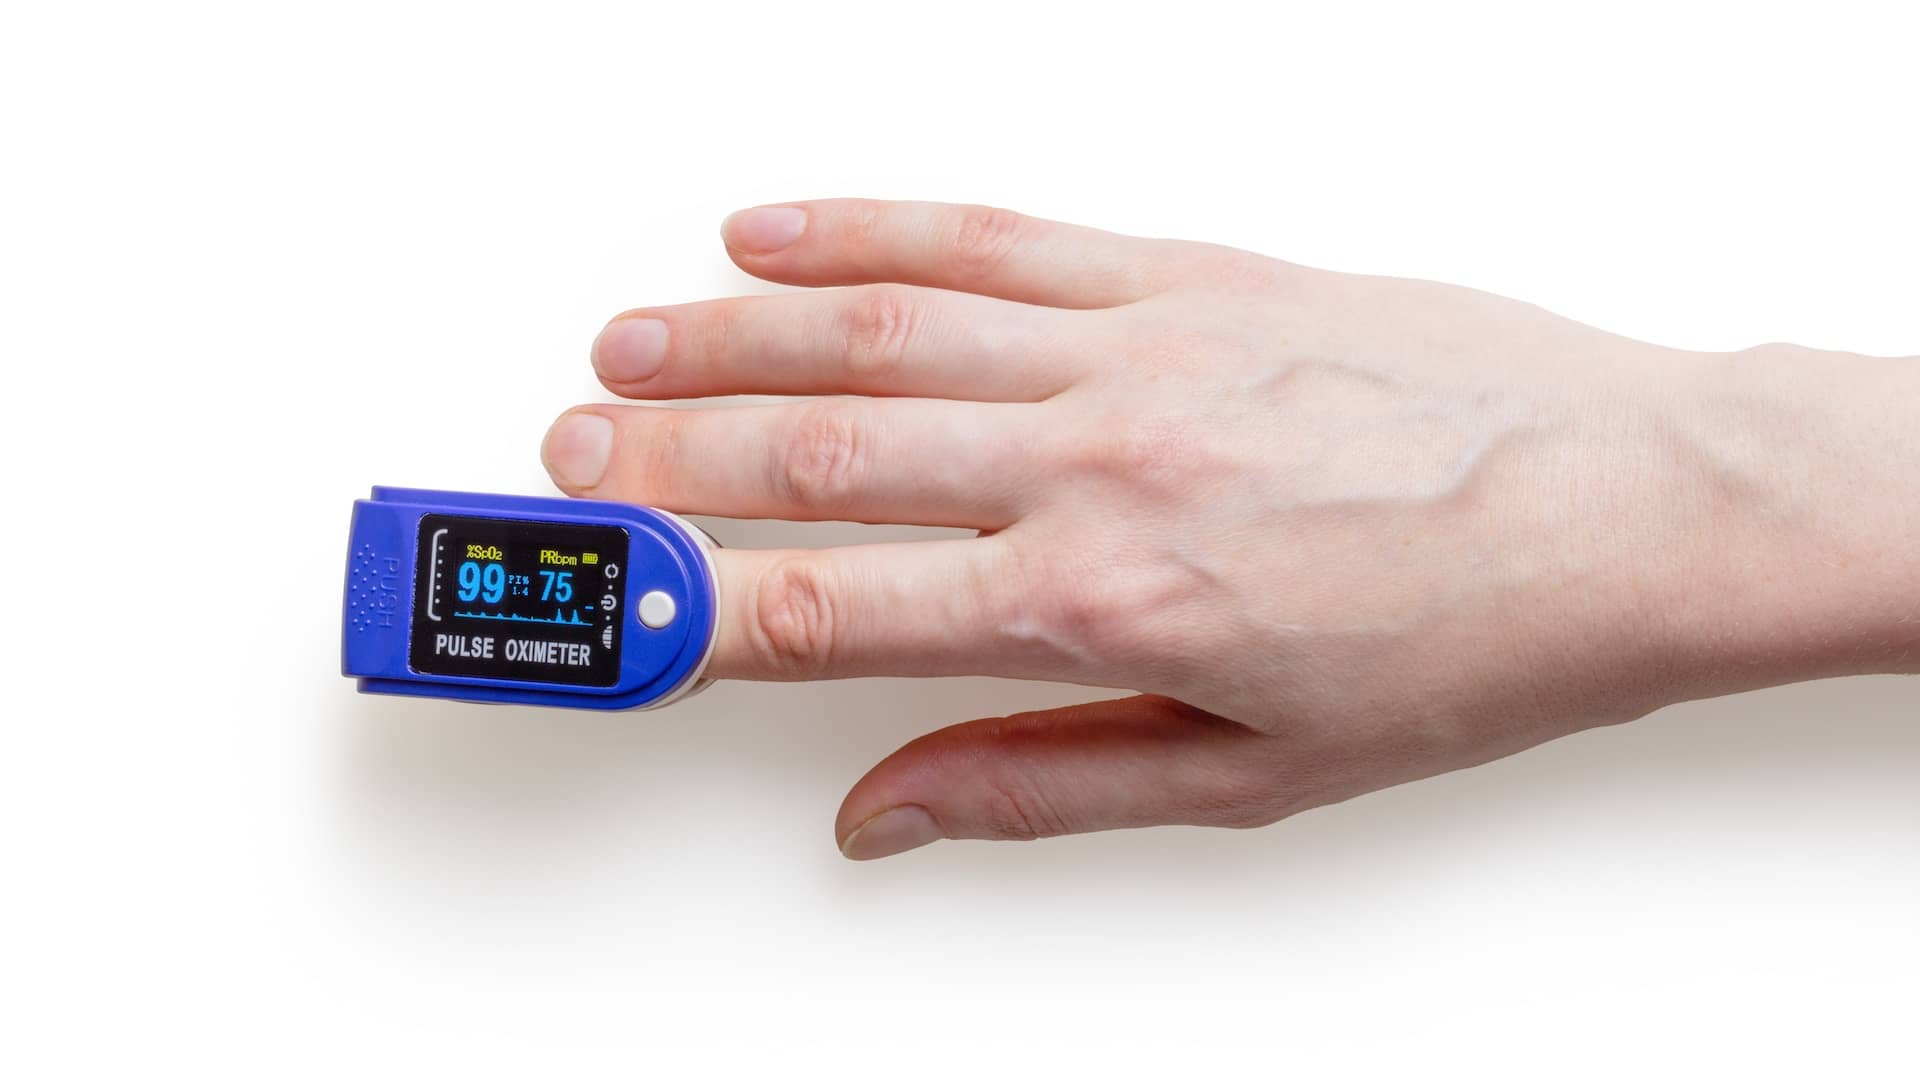 A device monitoring blood pressure